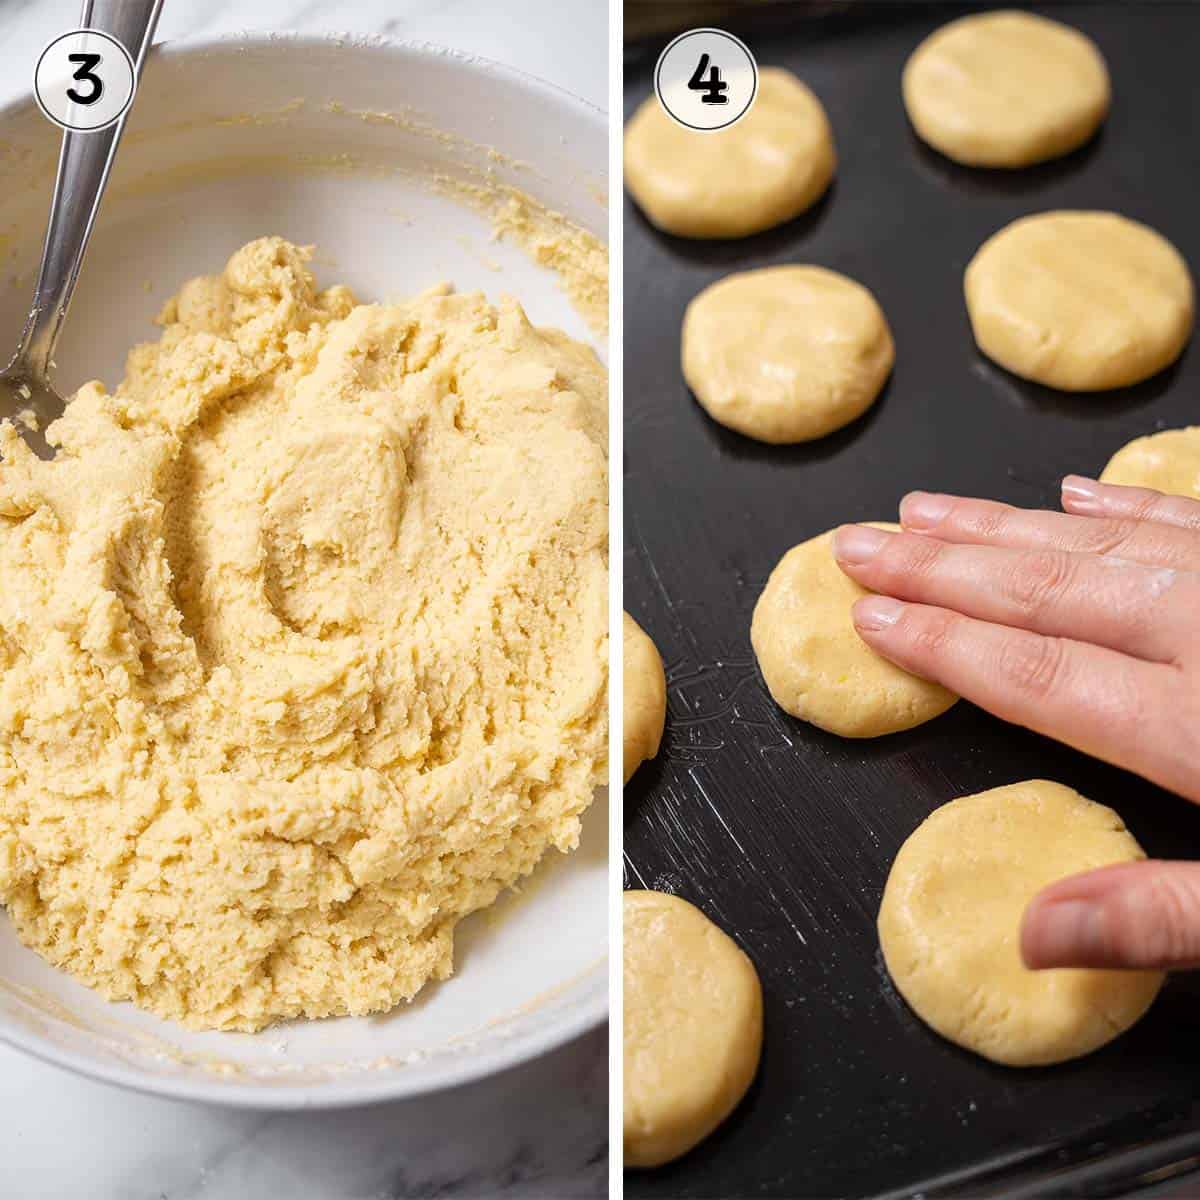 making the dough and shaping into round cookies.